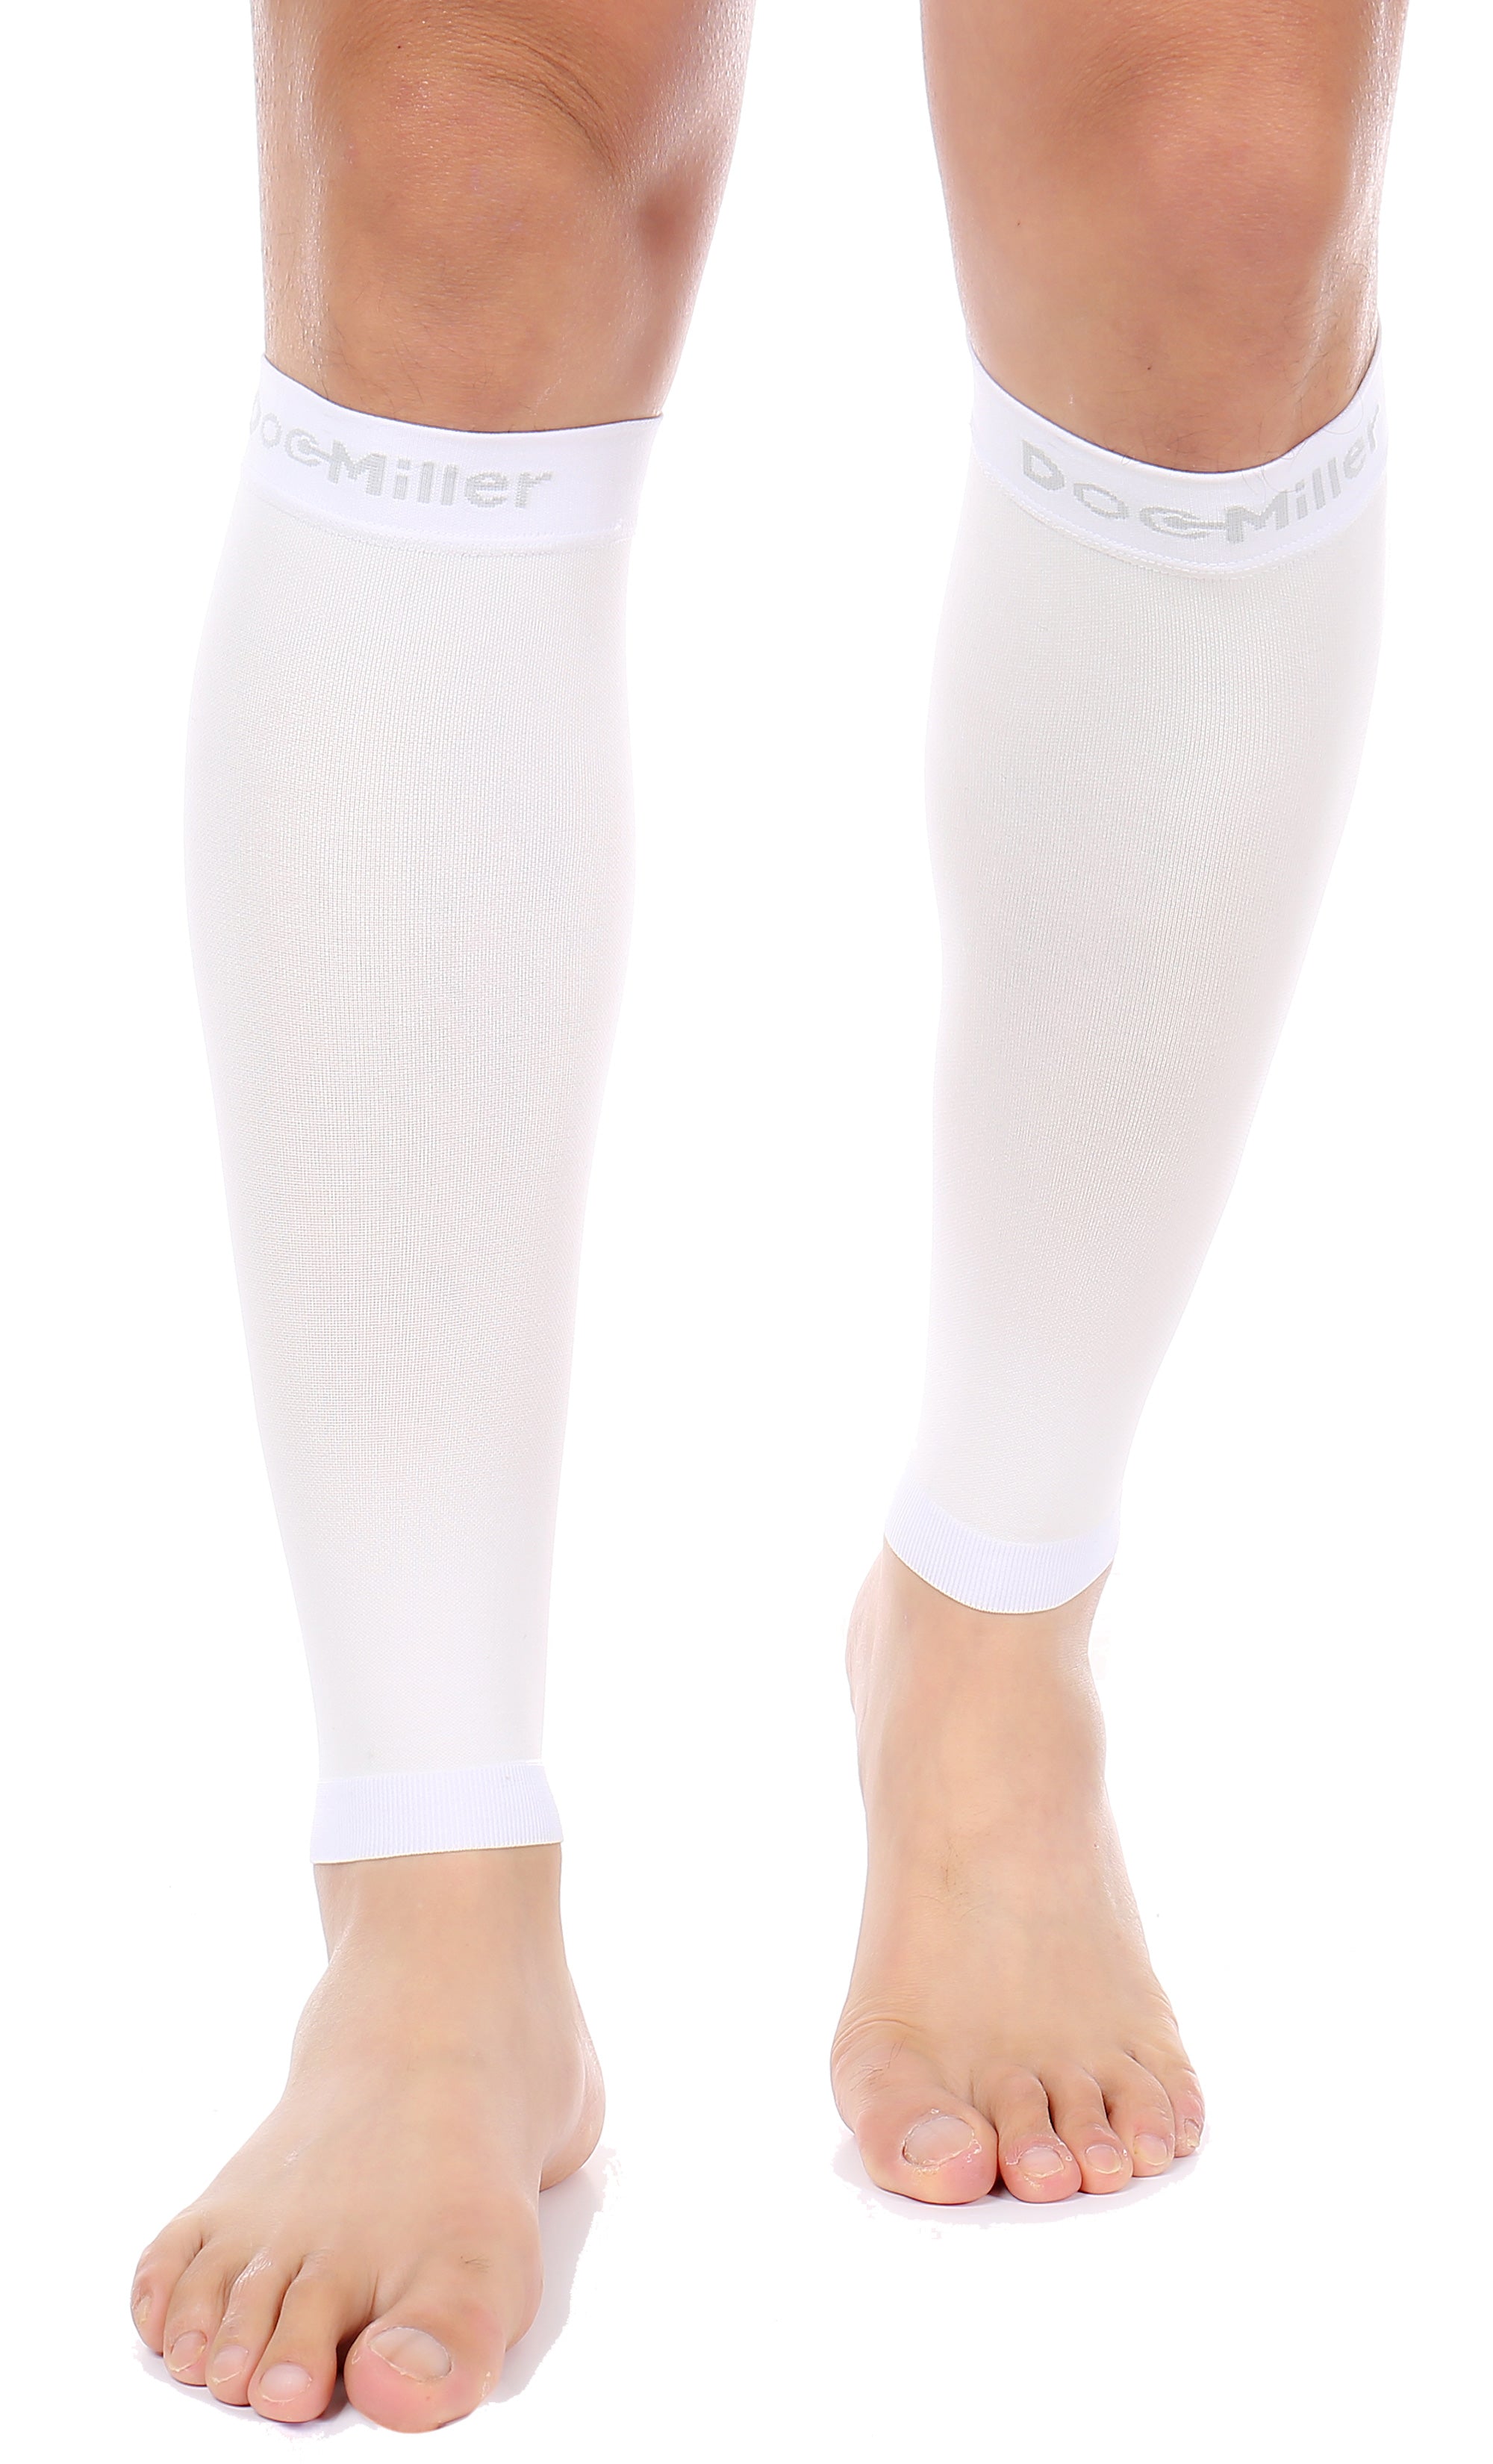 Premium Calf Compression Sleeve 15-20 mmHg WHITE by Doc Miller